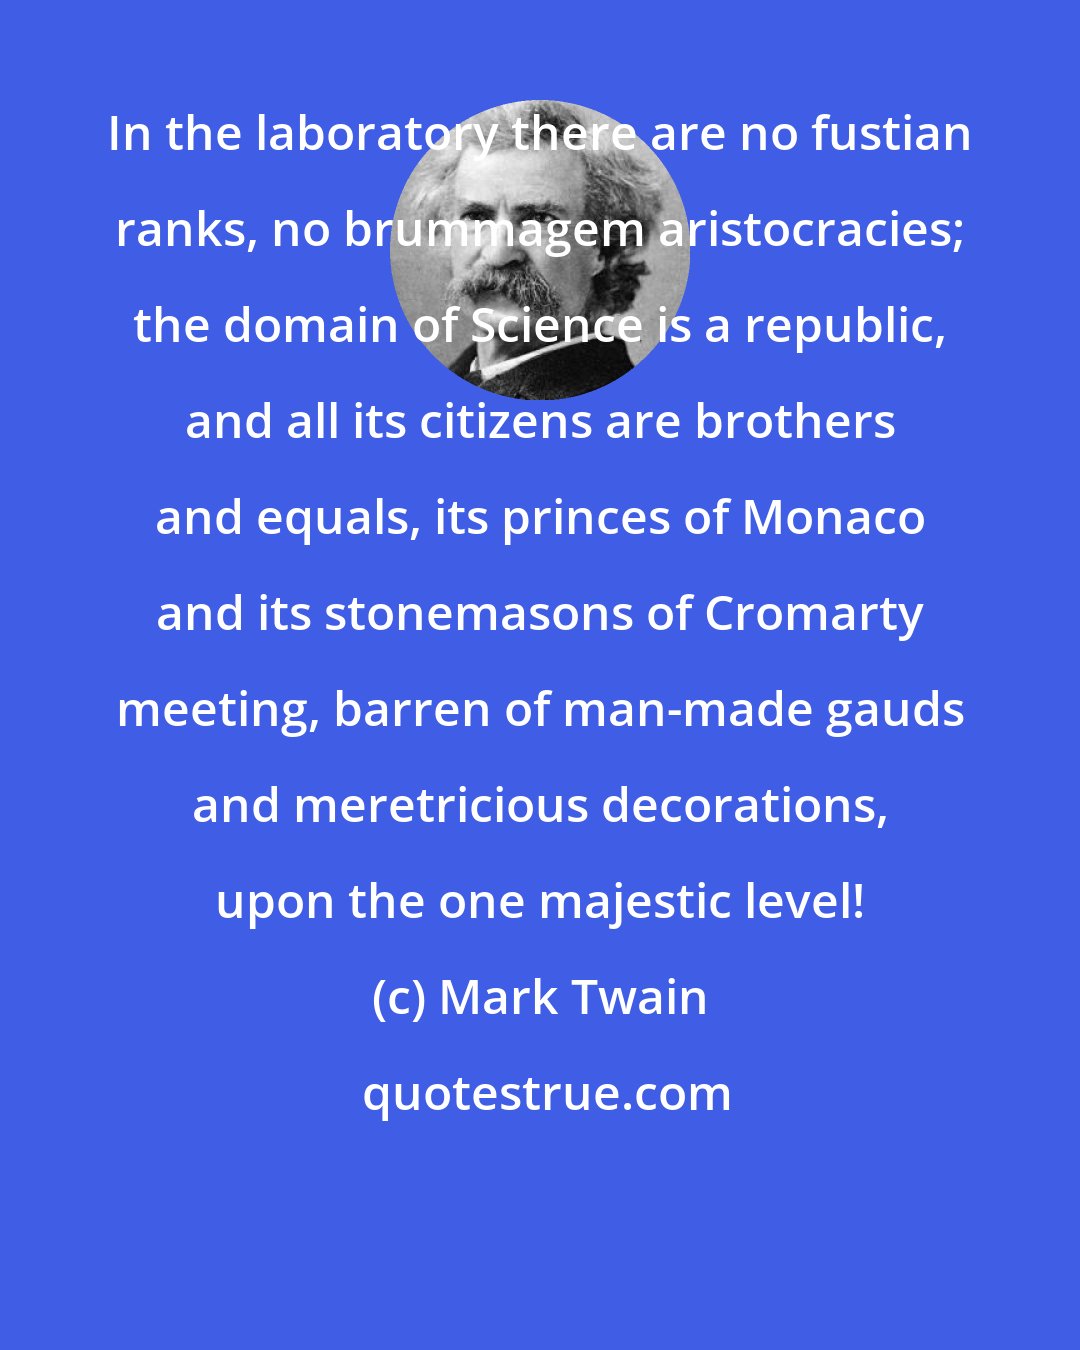 Mark Twain: In the laboratory there are no fustian ranks, no brummagem aristocracies; the domain of Science is a republic, and all its citizens are brothers and equals, its princes of Monaco and its stonemasons of Cromarty meeting, barren of man-made gauds and meretricious decorations, upon the one majestic level!